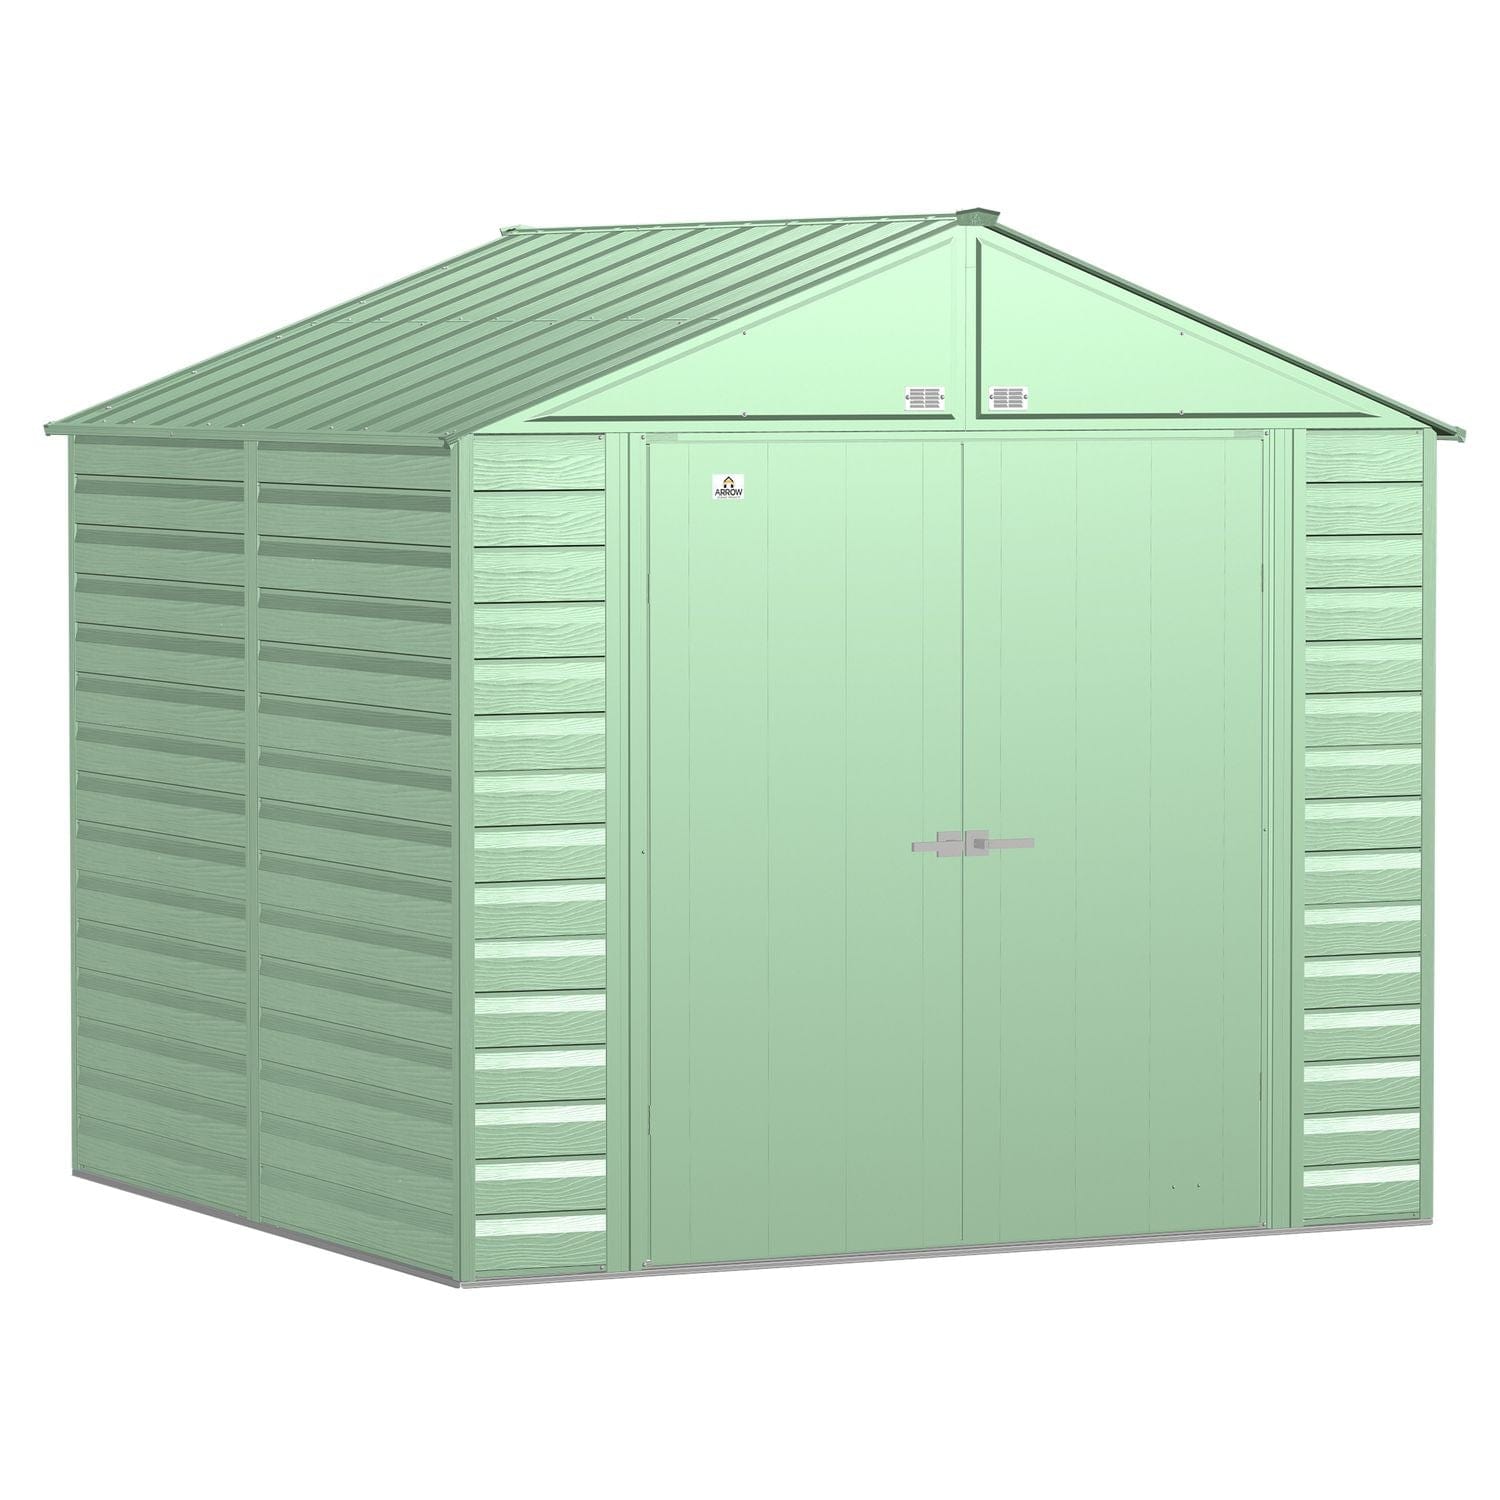 Arrow Sheds & Storage Buildings Arrow | Select Gable Roof Steel Storage Shed, 8x6 ft., Sage Green SCG86SG